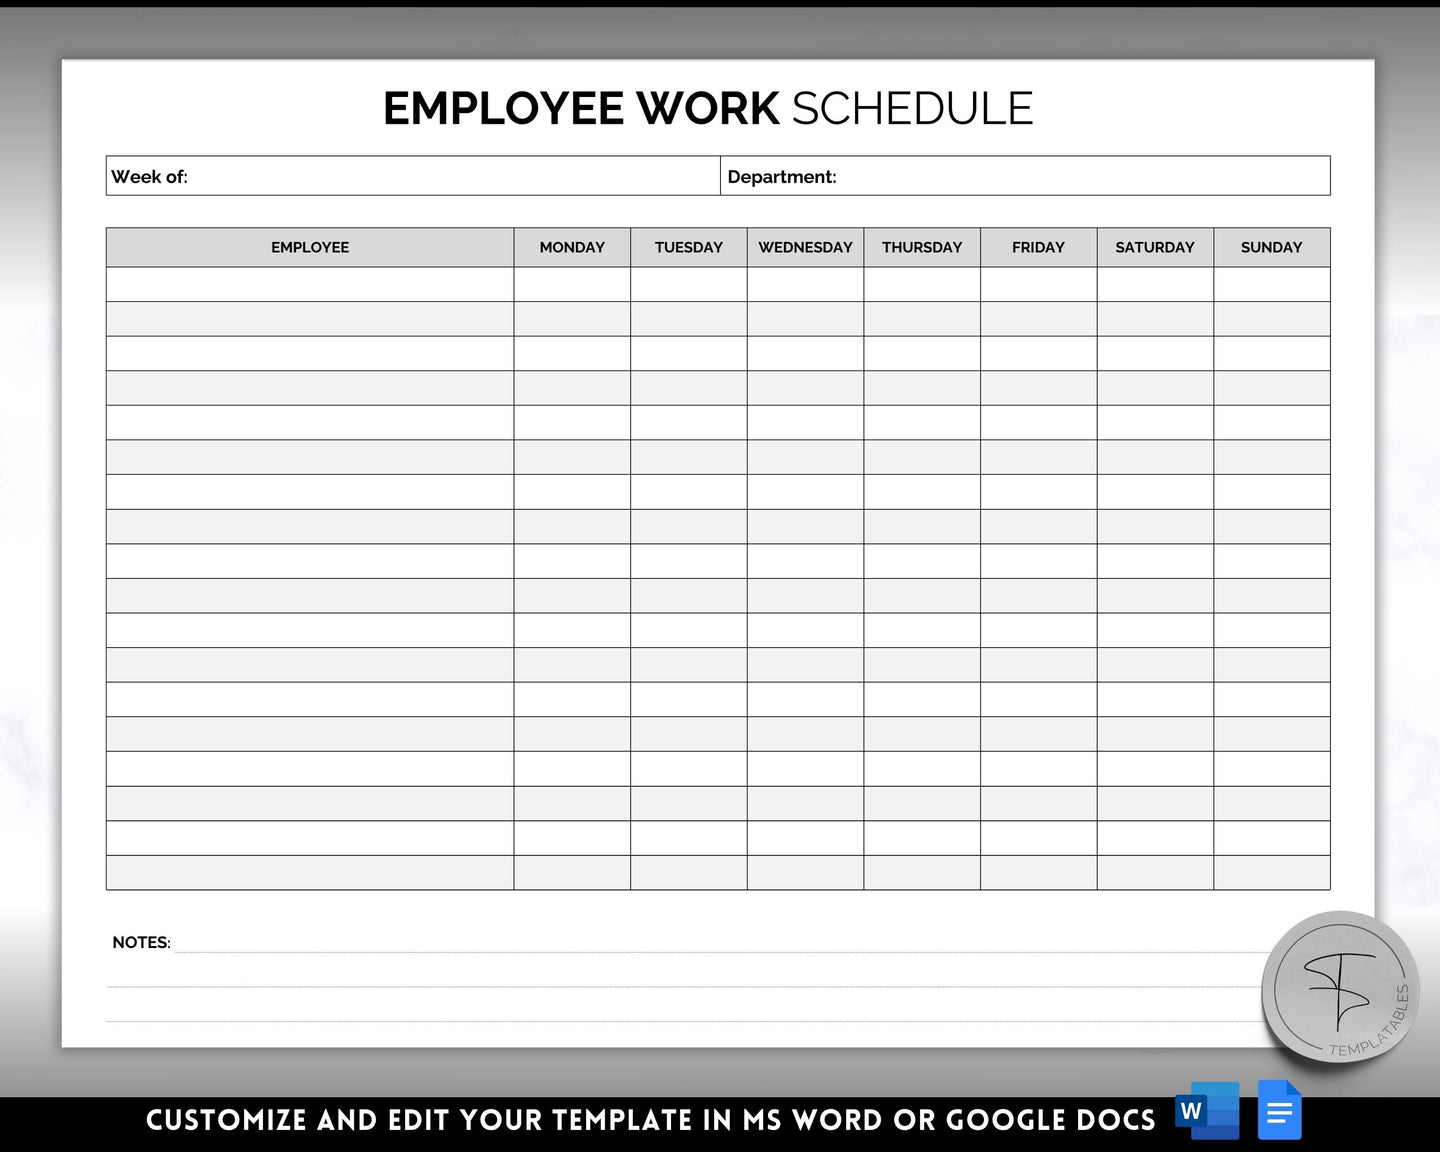 Employee Work Schedule & Time Tracker | EDITABLE Employee Time Sheet Template for Google Docs & Microsoft Word